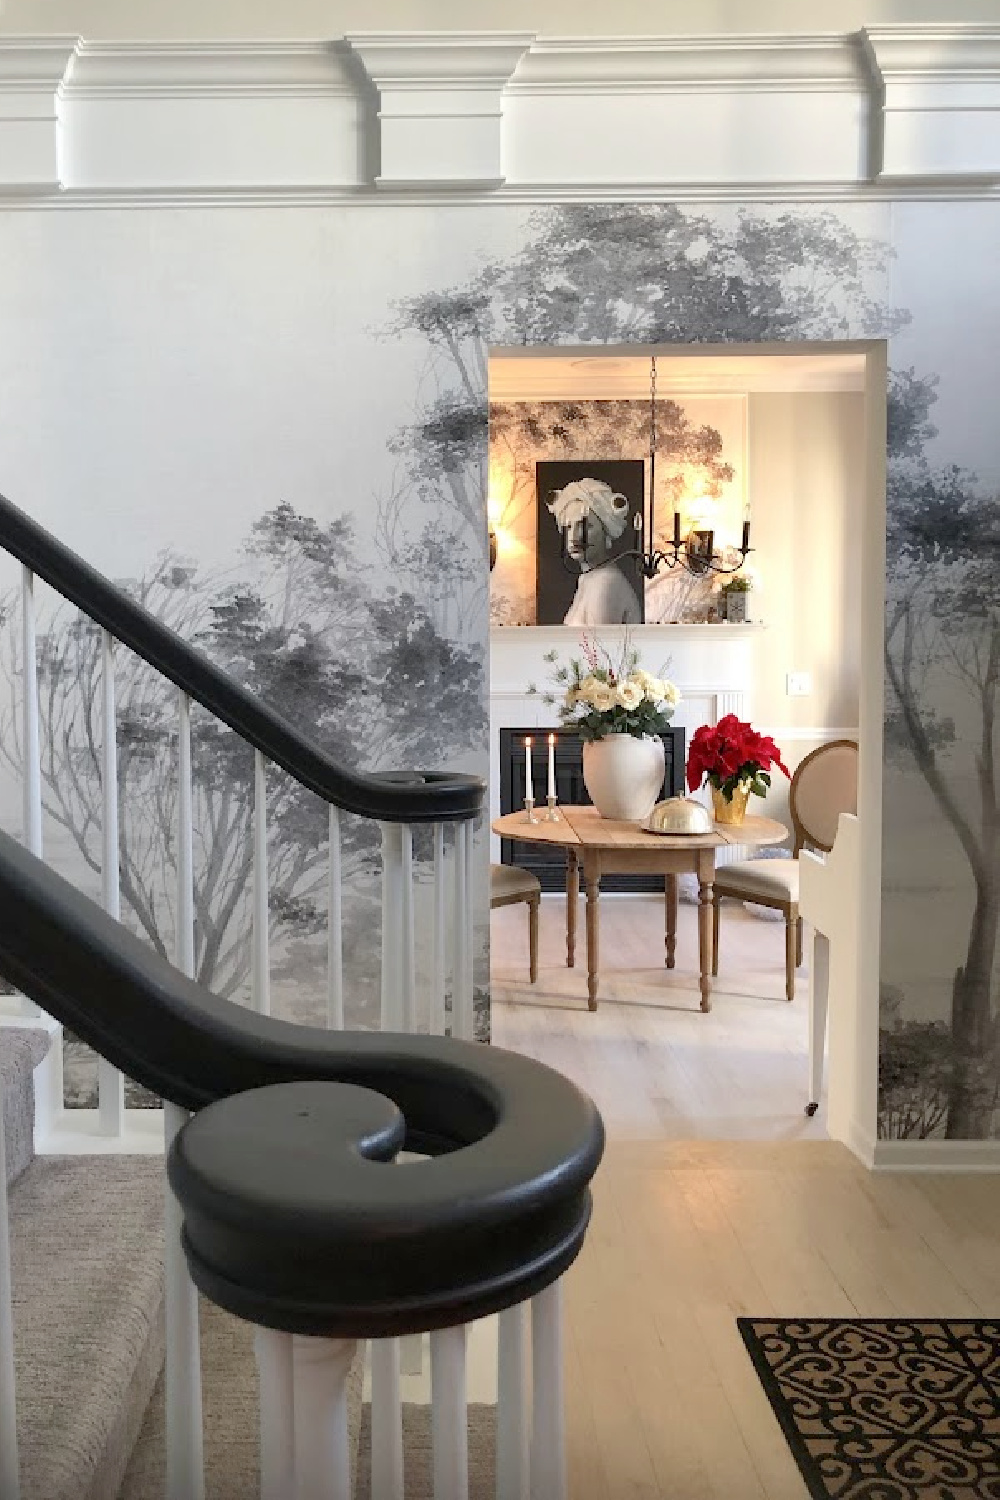 Holiday decor in our entry and dining room which feature a wallpapered tree mural, light grey stained floors, and a gentle quiet palette of serene hues - Hello Lovely Studio. #elegantchristmas #modernfrenchchristmas